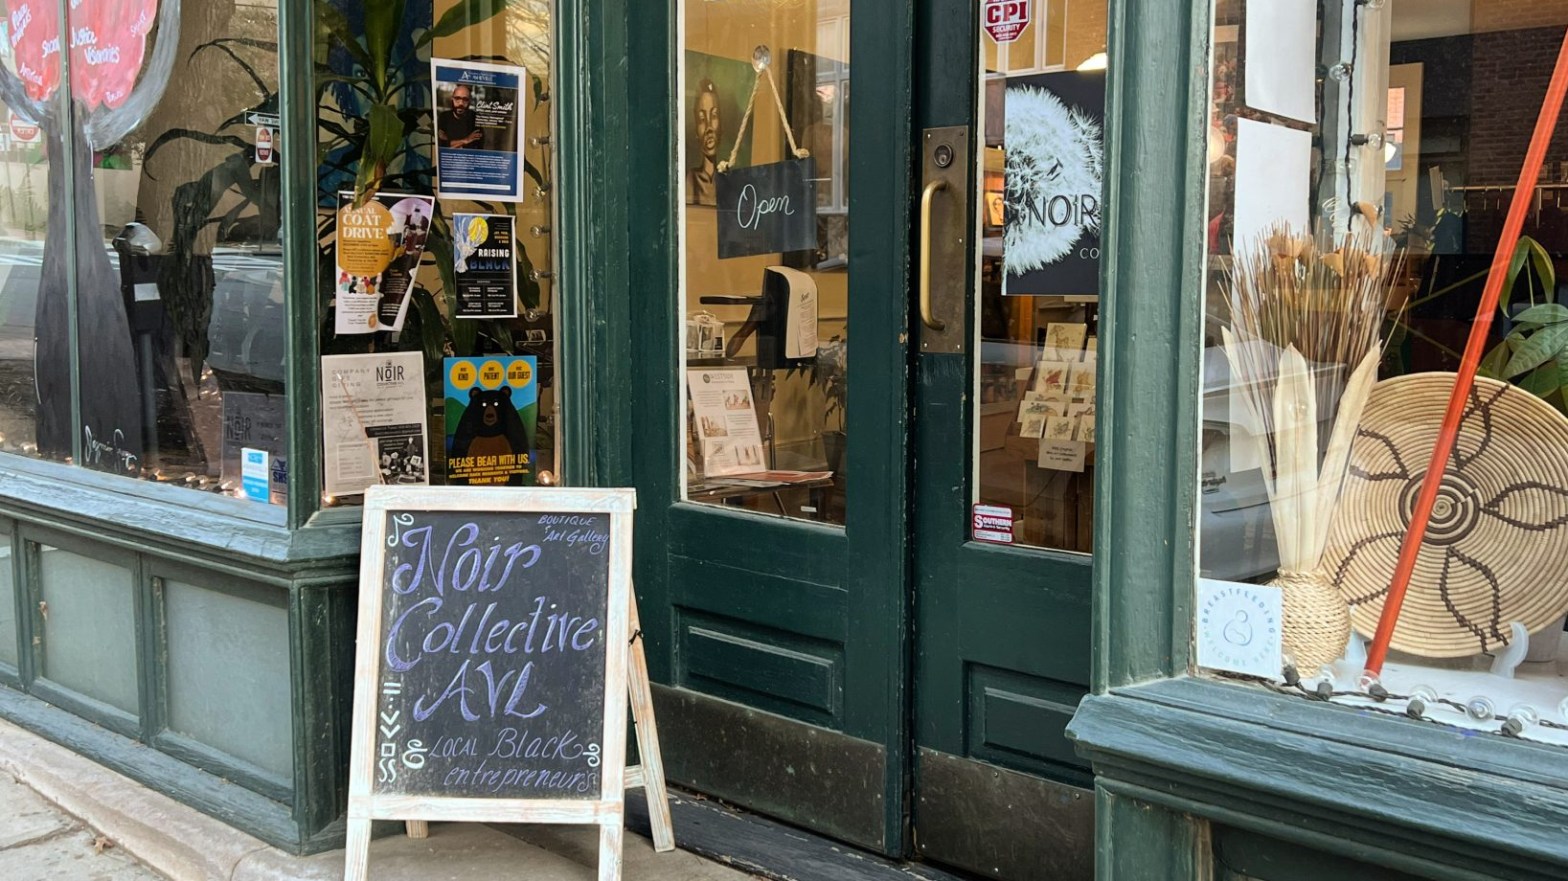 The exterior of Noir Collective AVL. The words are printed in the center of a window in white. The shop itself is green. White lights dangle from the window and it is filled with prints, books, and art.